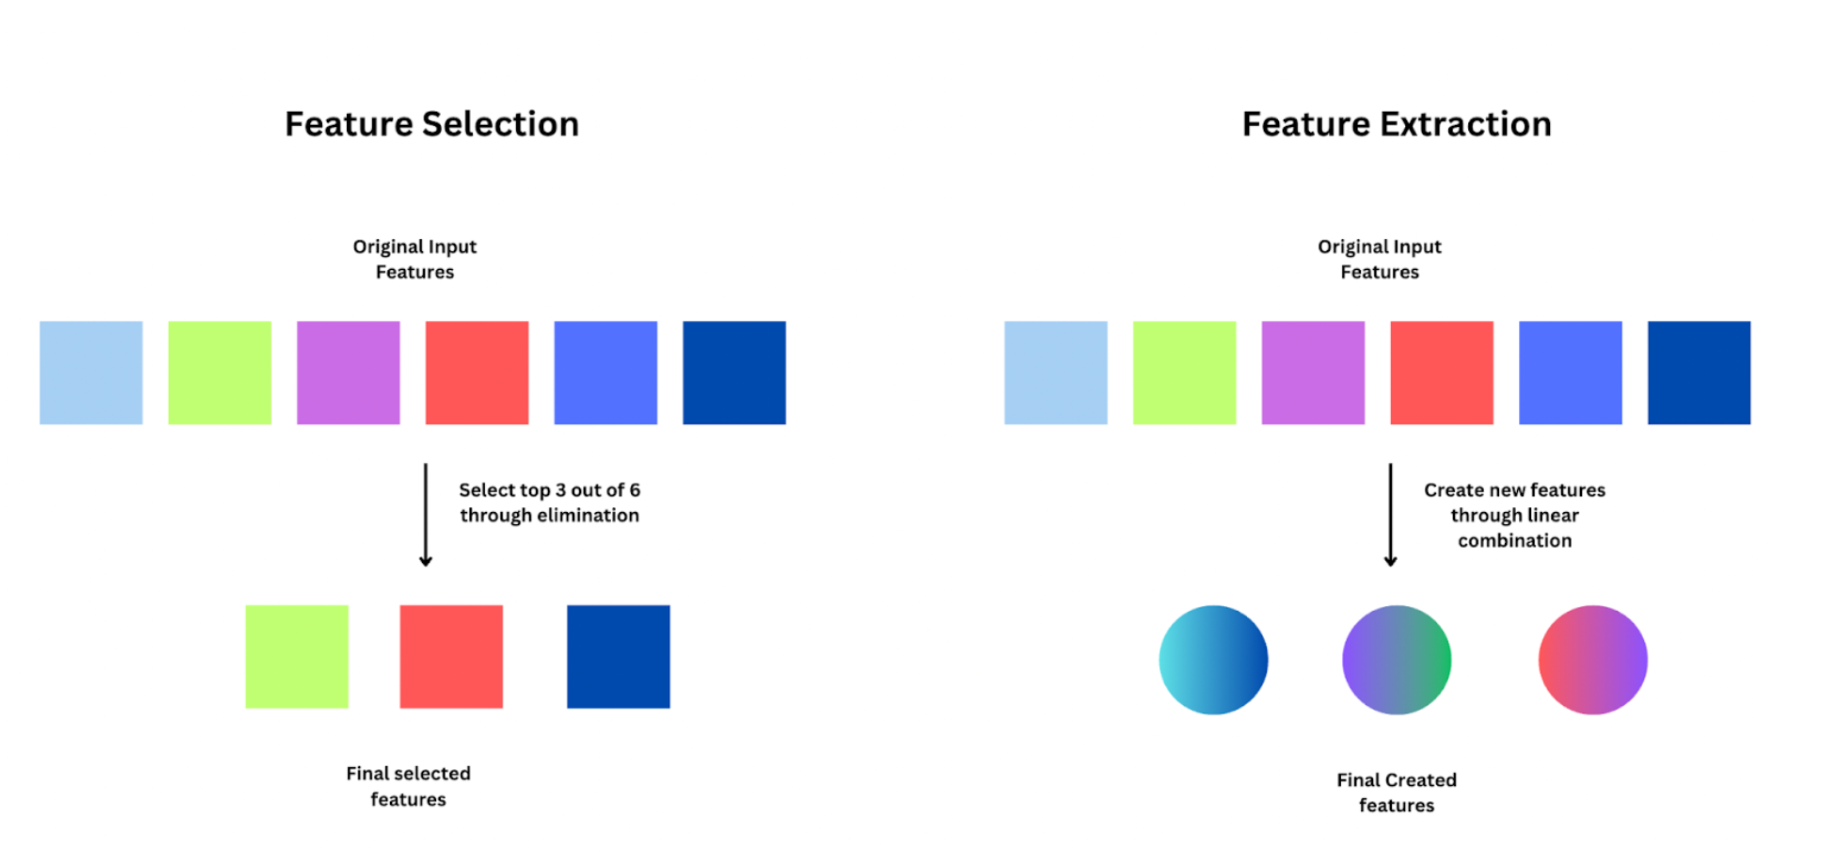 Feature extraction and feature selection difference